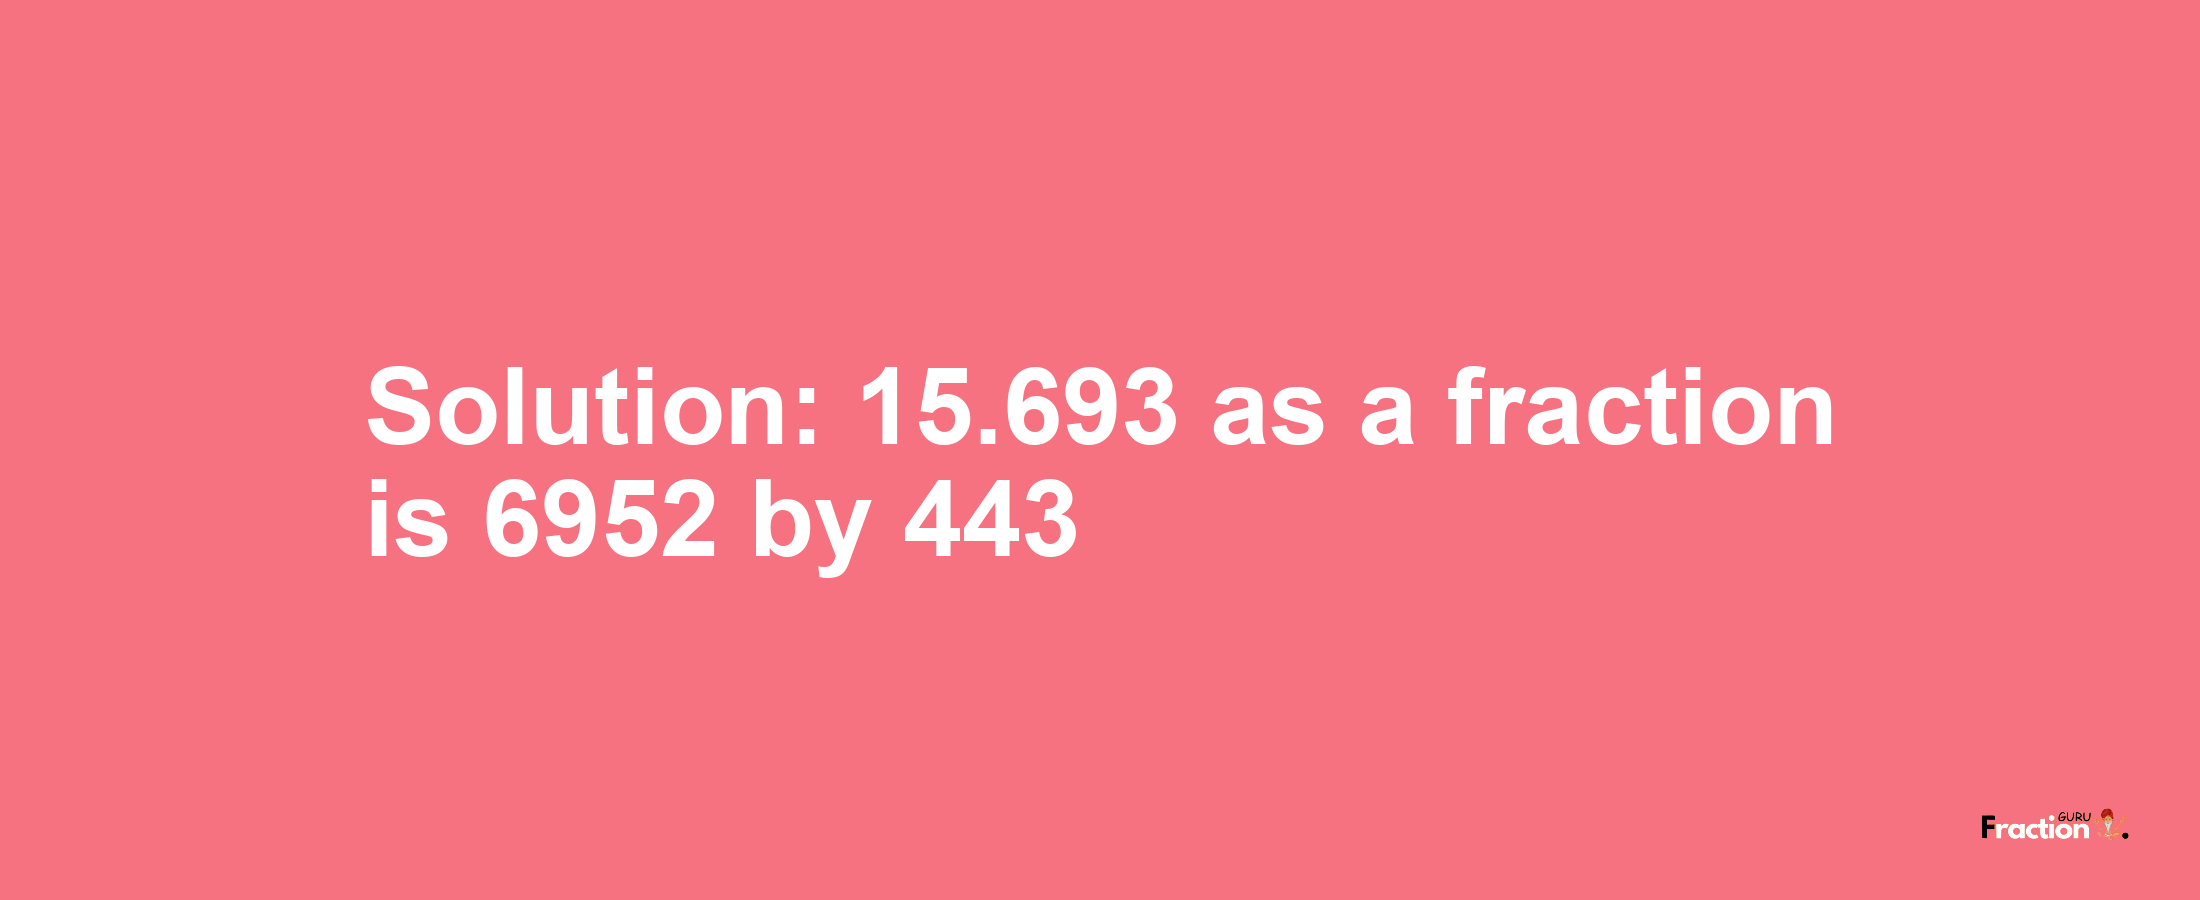 Solution:15.693 as a fraction is 6952/443